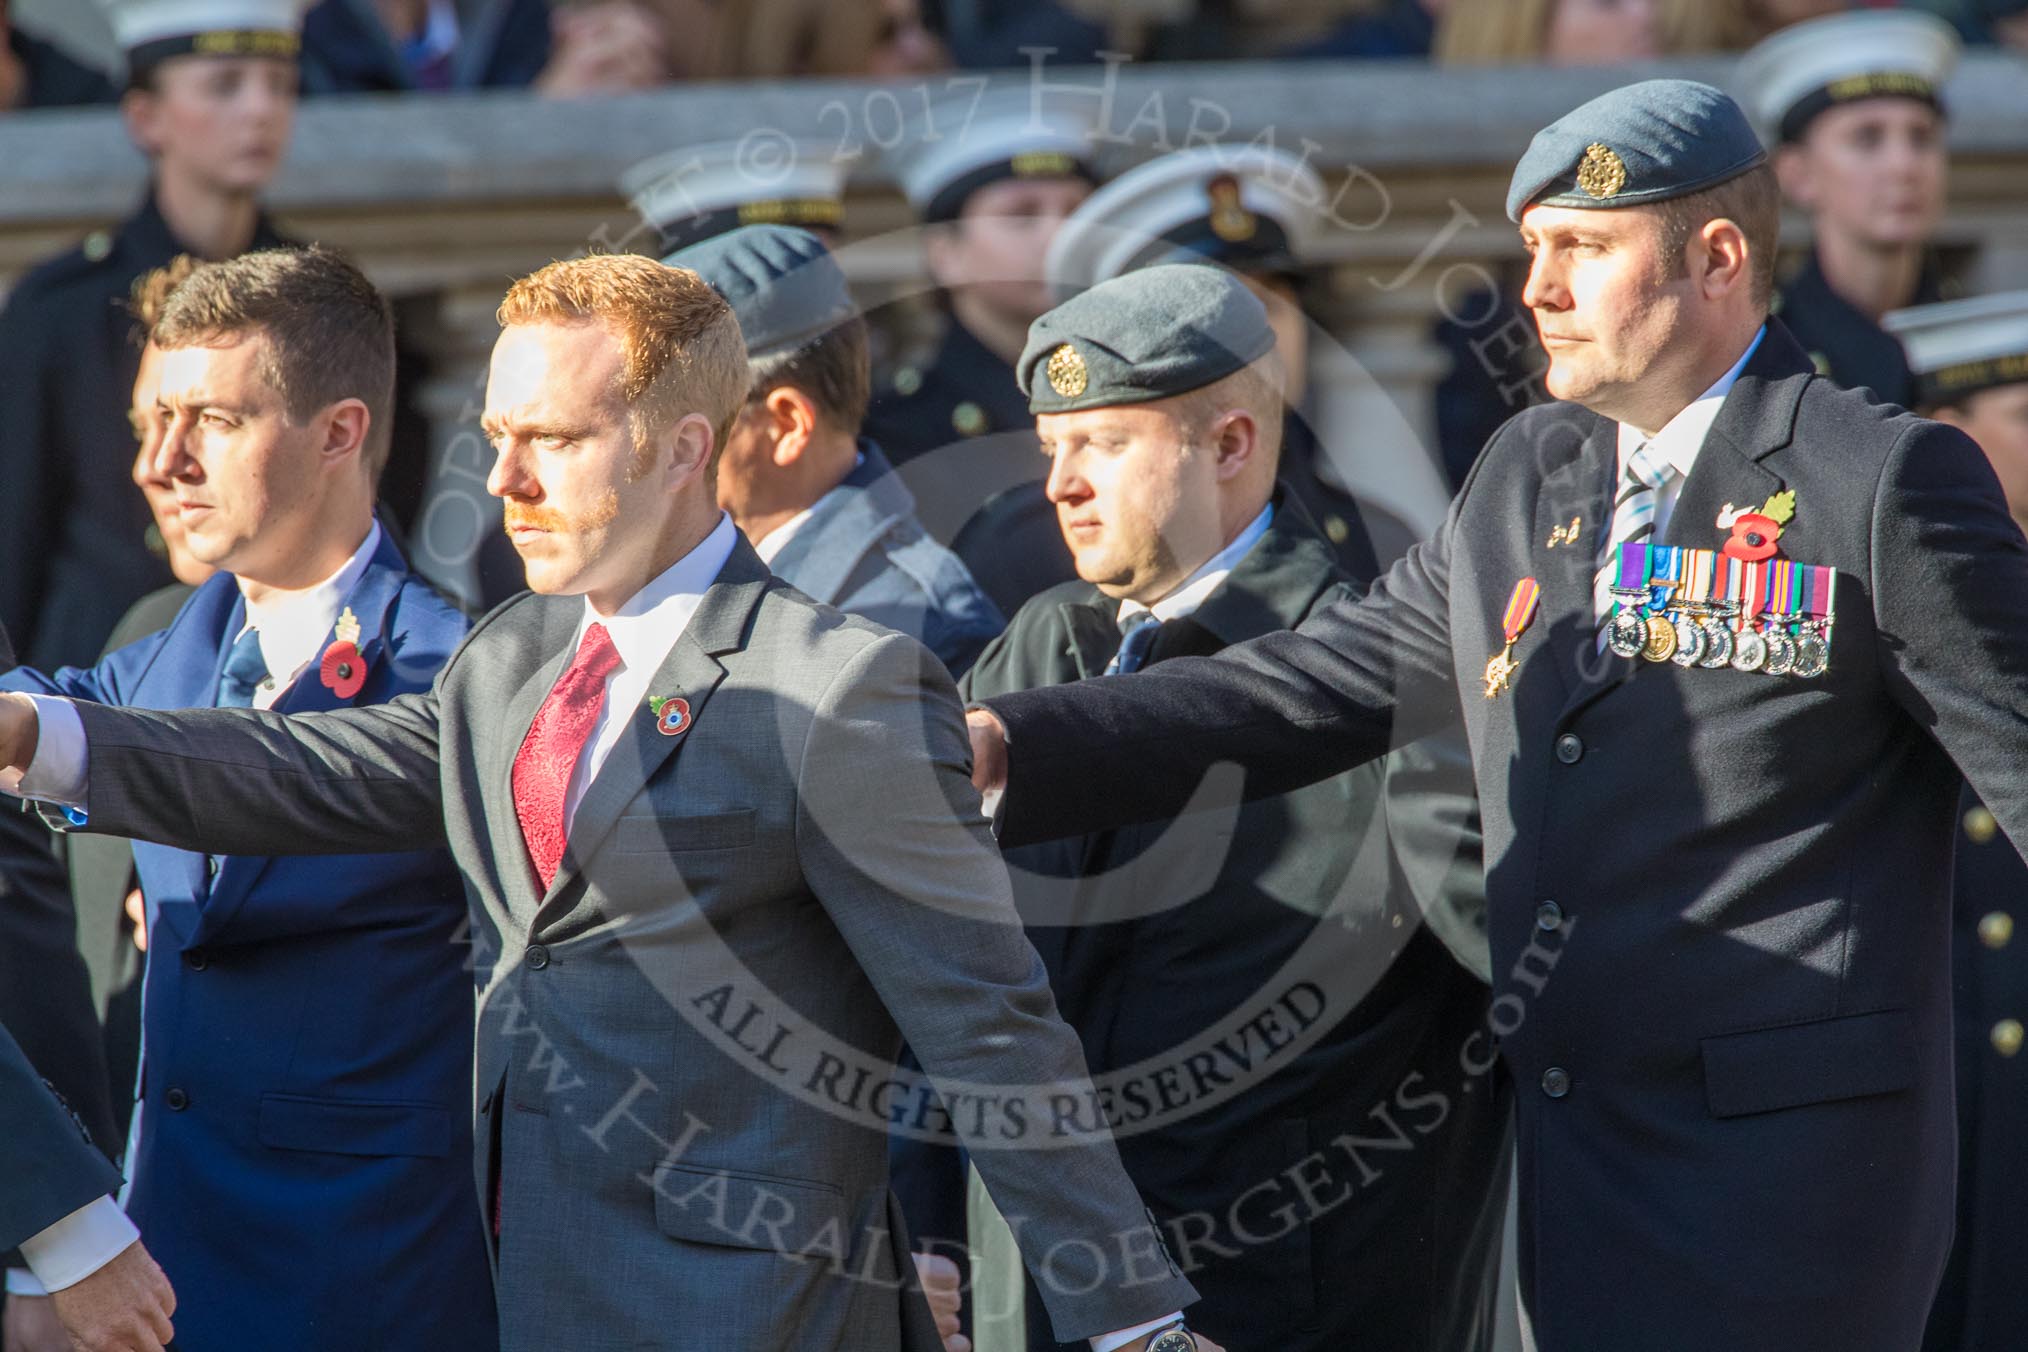 7 Squadron Association (Group C8, 20 members) during the Royal British Legion March Past on Remembrance Sunday at the Cenotaph, Whitehall, Westminster, London, 11 November 2018, 12:15.